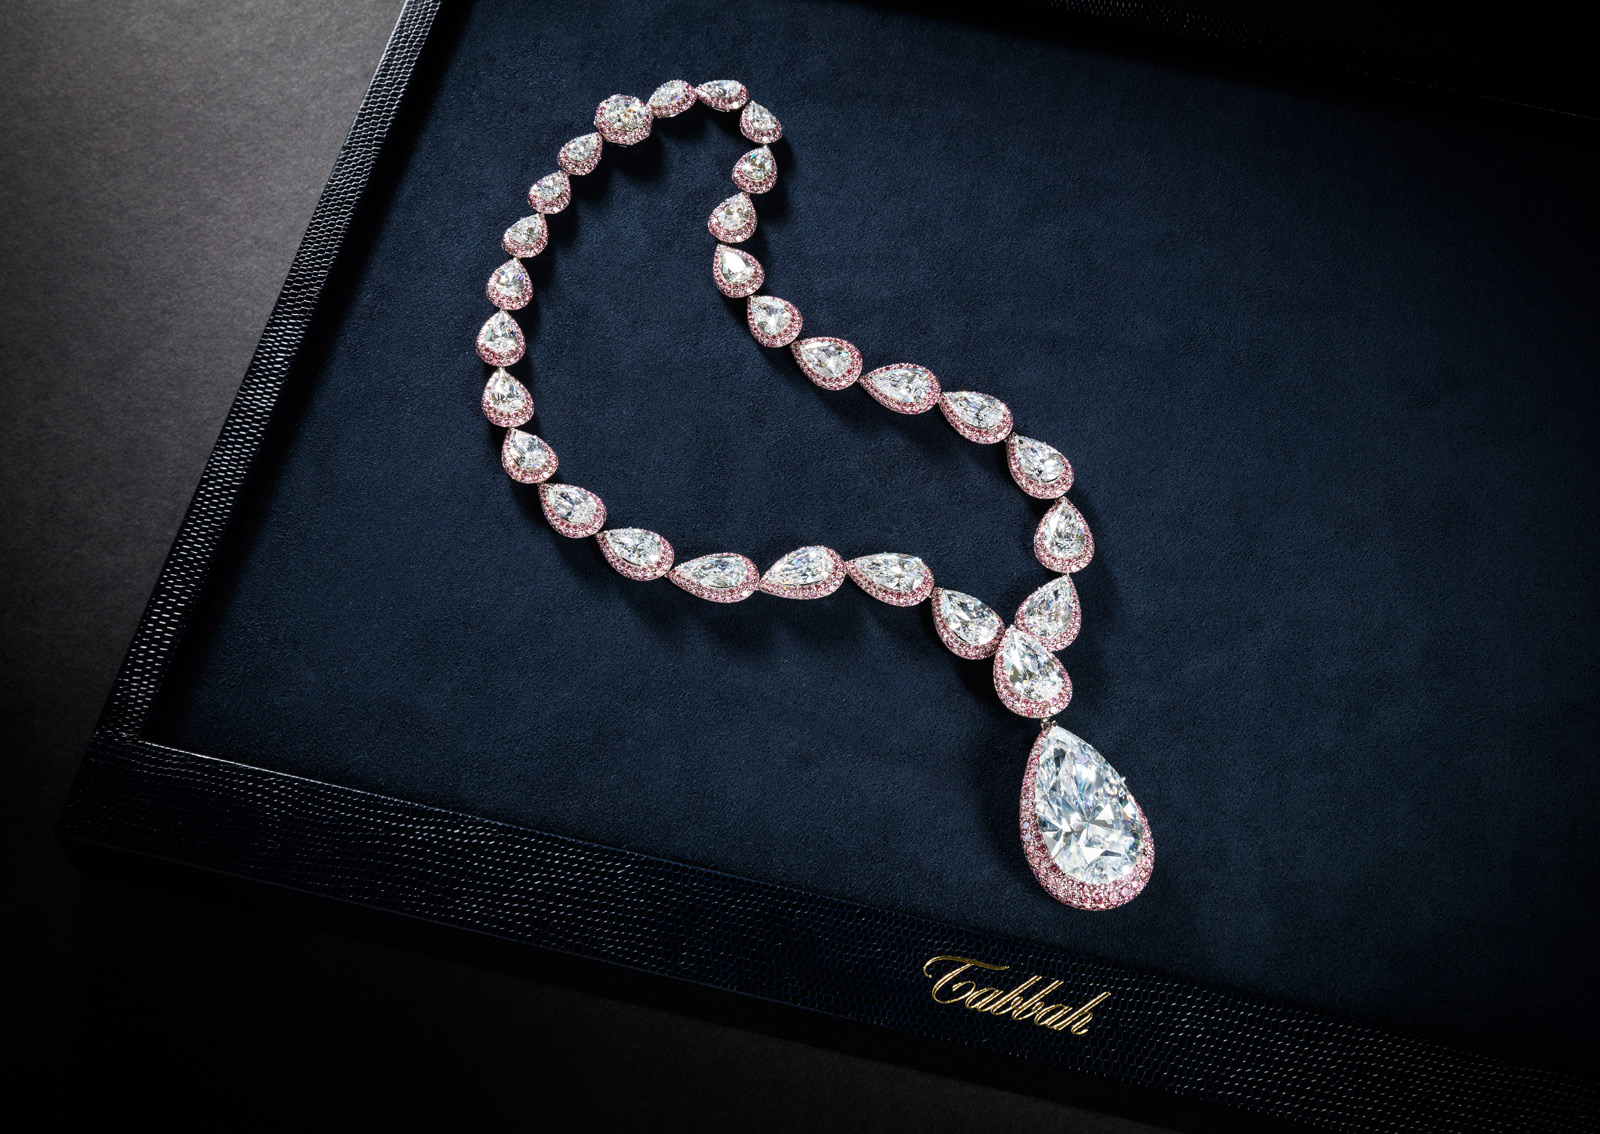 Maison Tabbah commissioned necklace with a pear-shaped colourless diamond and pink diamonds